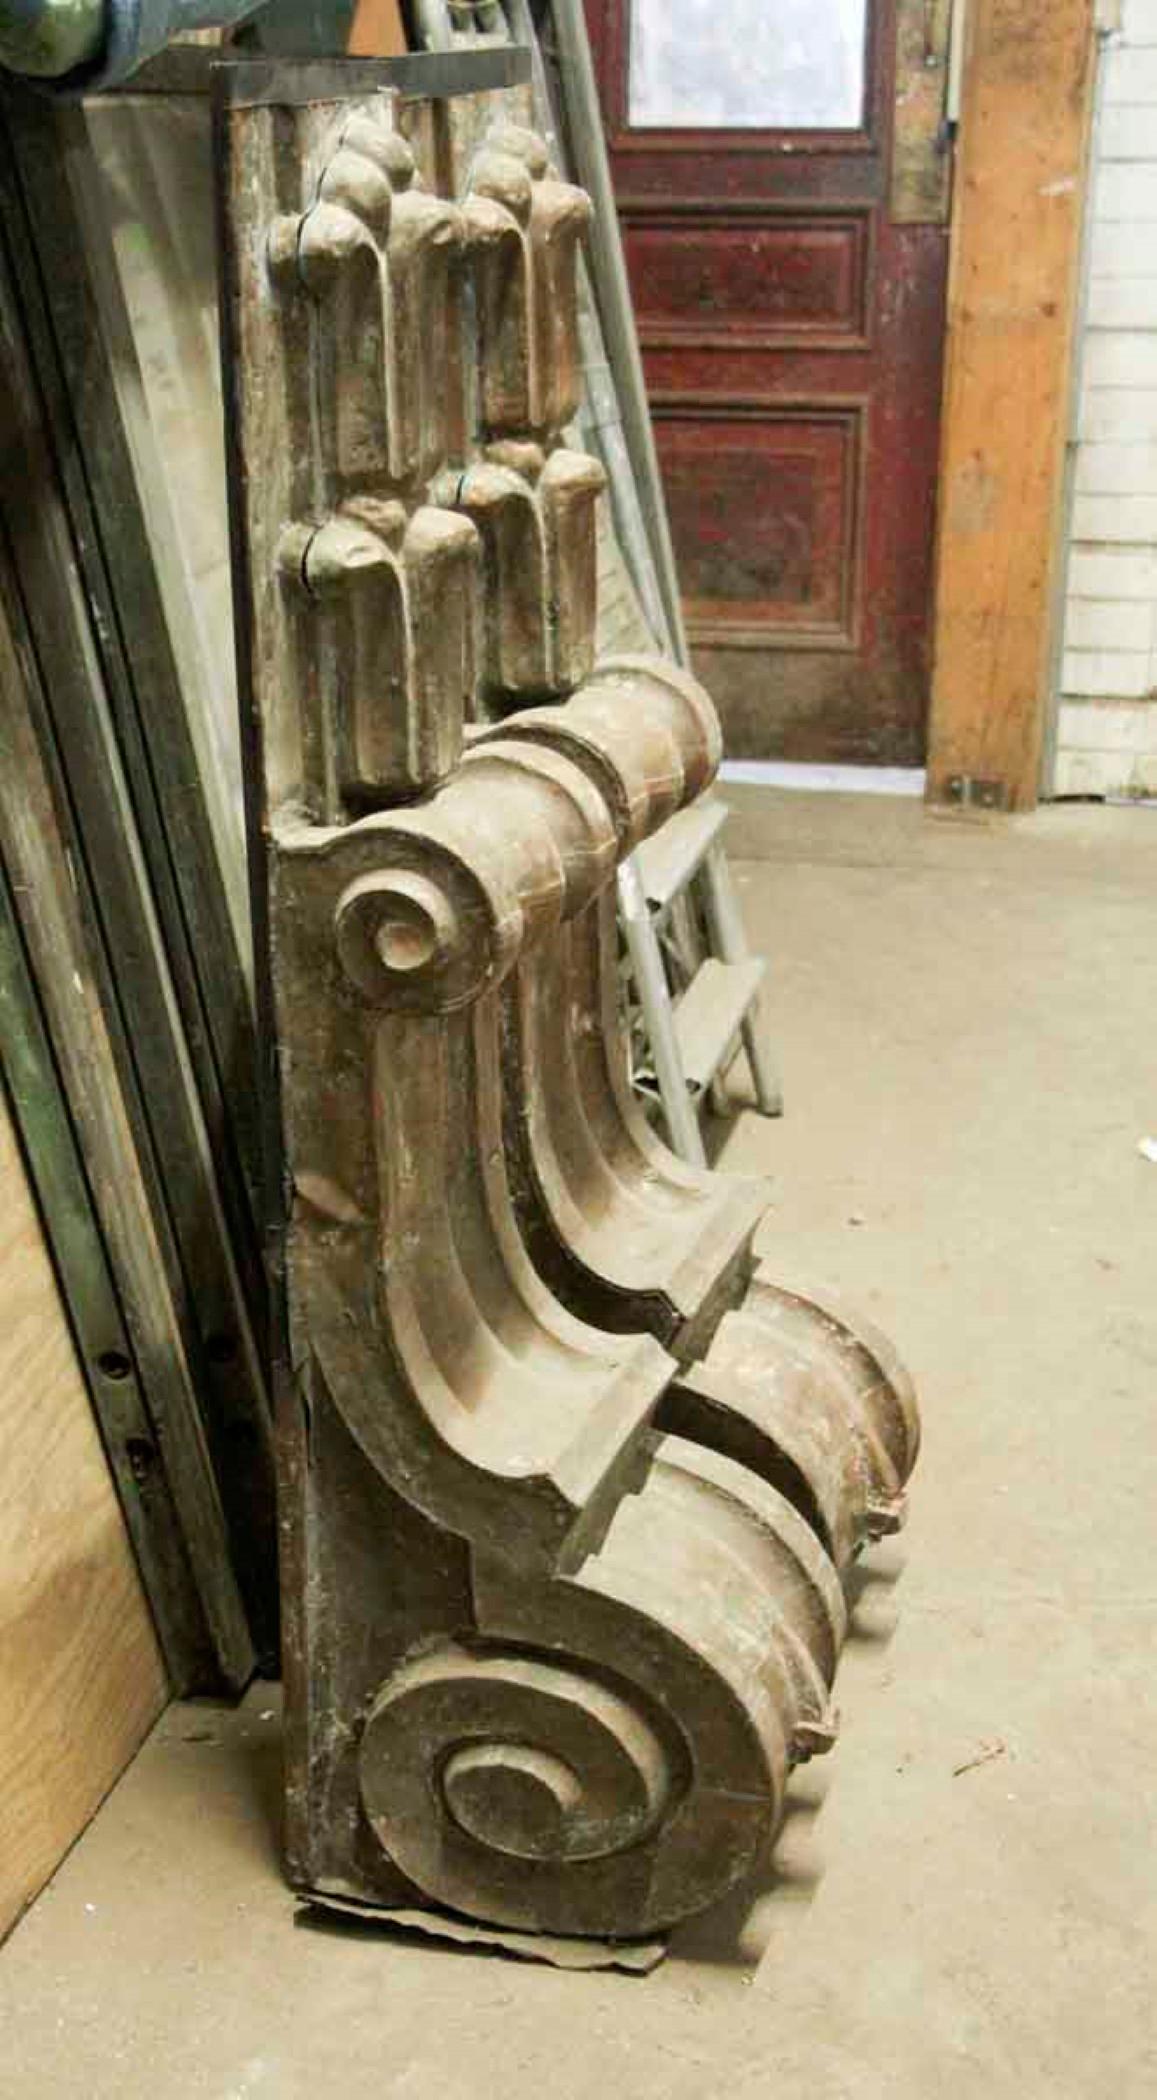 This pair of antique copper corbels is the work of an early 20th century craftsman. They are large scale, and measure just over 4 feet high. They have a natural patina from the outside elements, where they were displayed near the windows of a